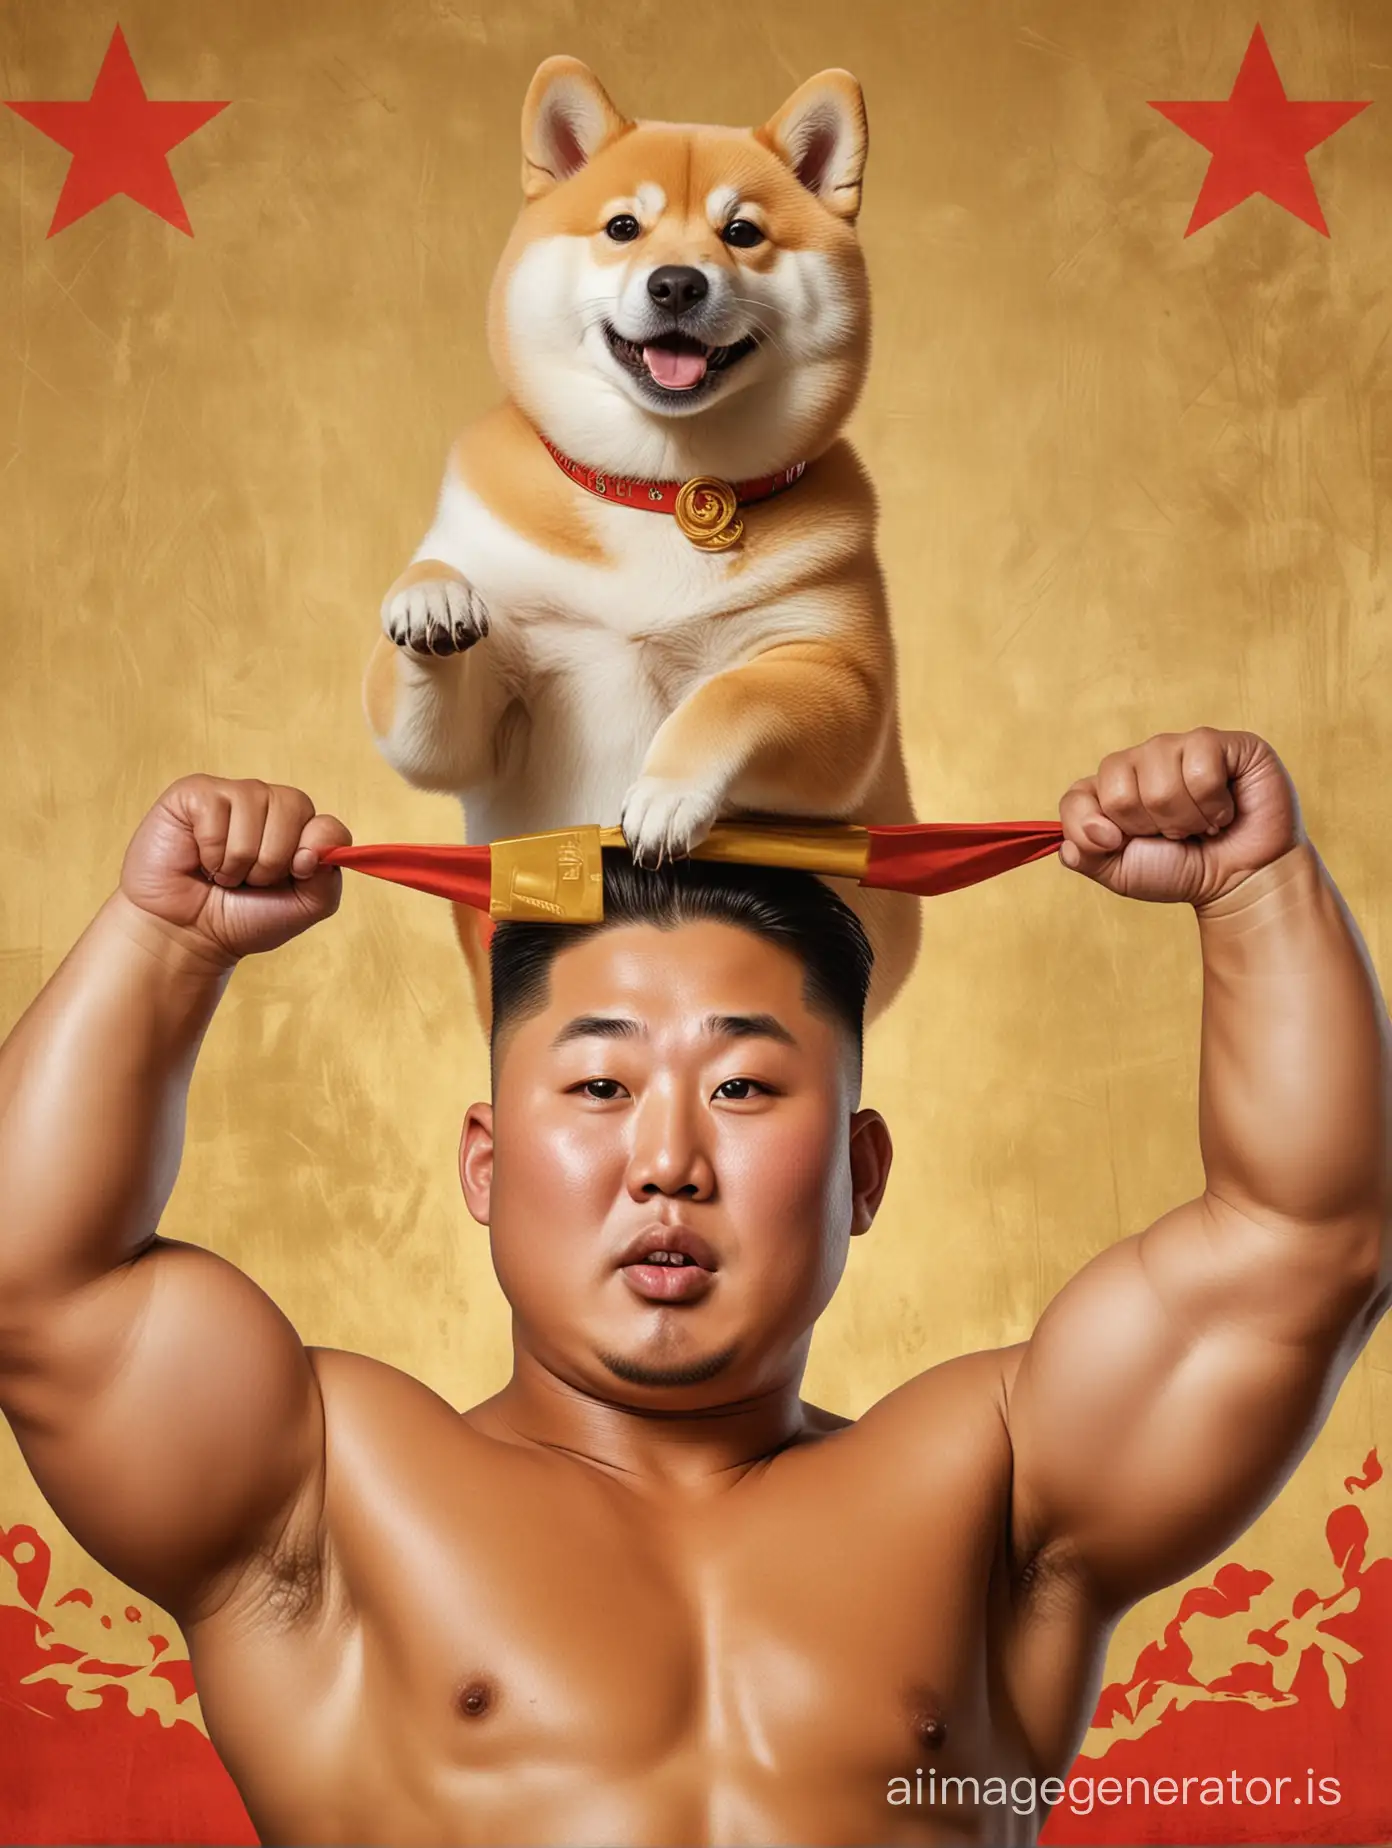 Portrait of Kim jong un as a bodybuilder lifting a solid gold Shiba Inu above his head in the style of a vintage North Korean communist propaganda poster